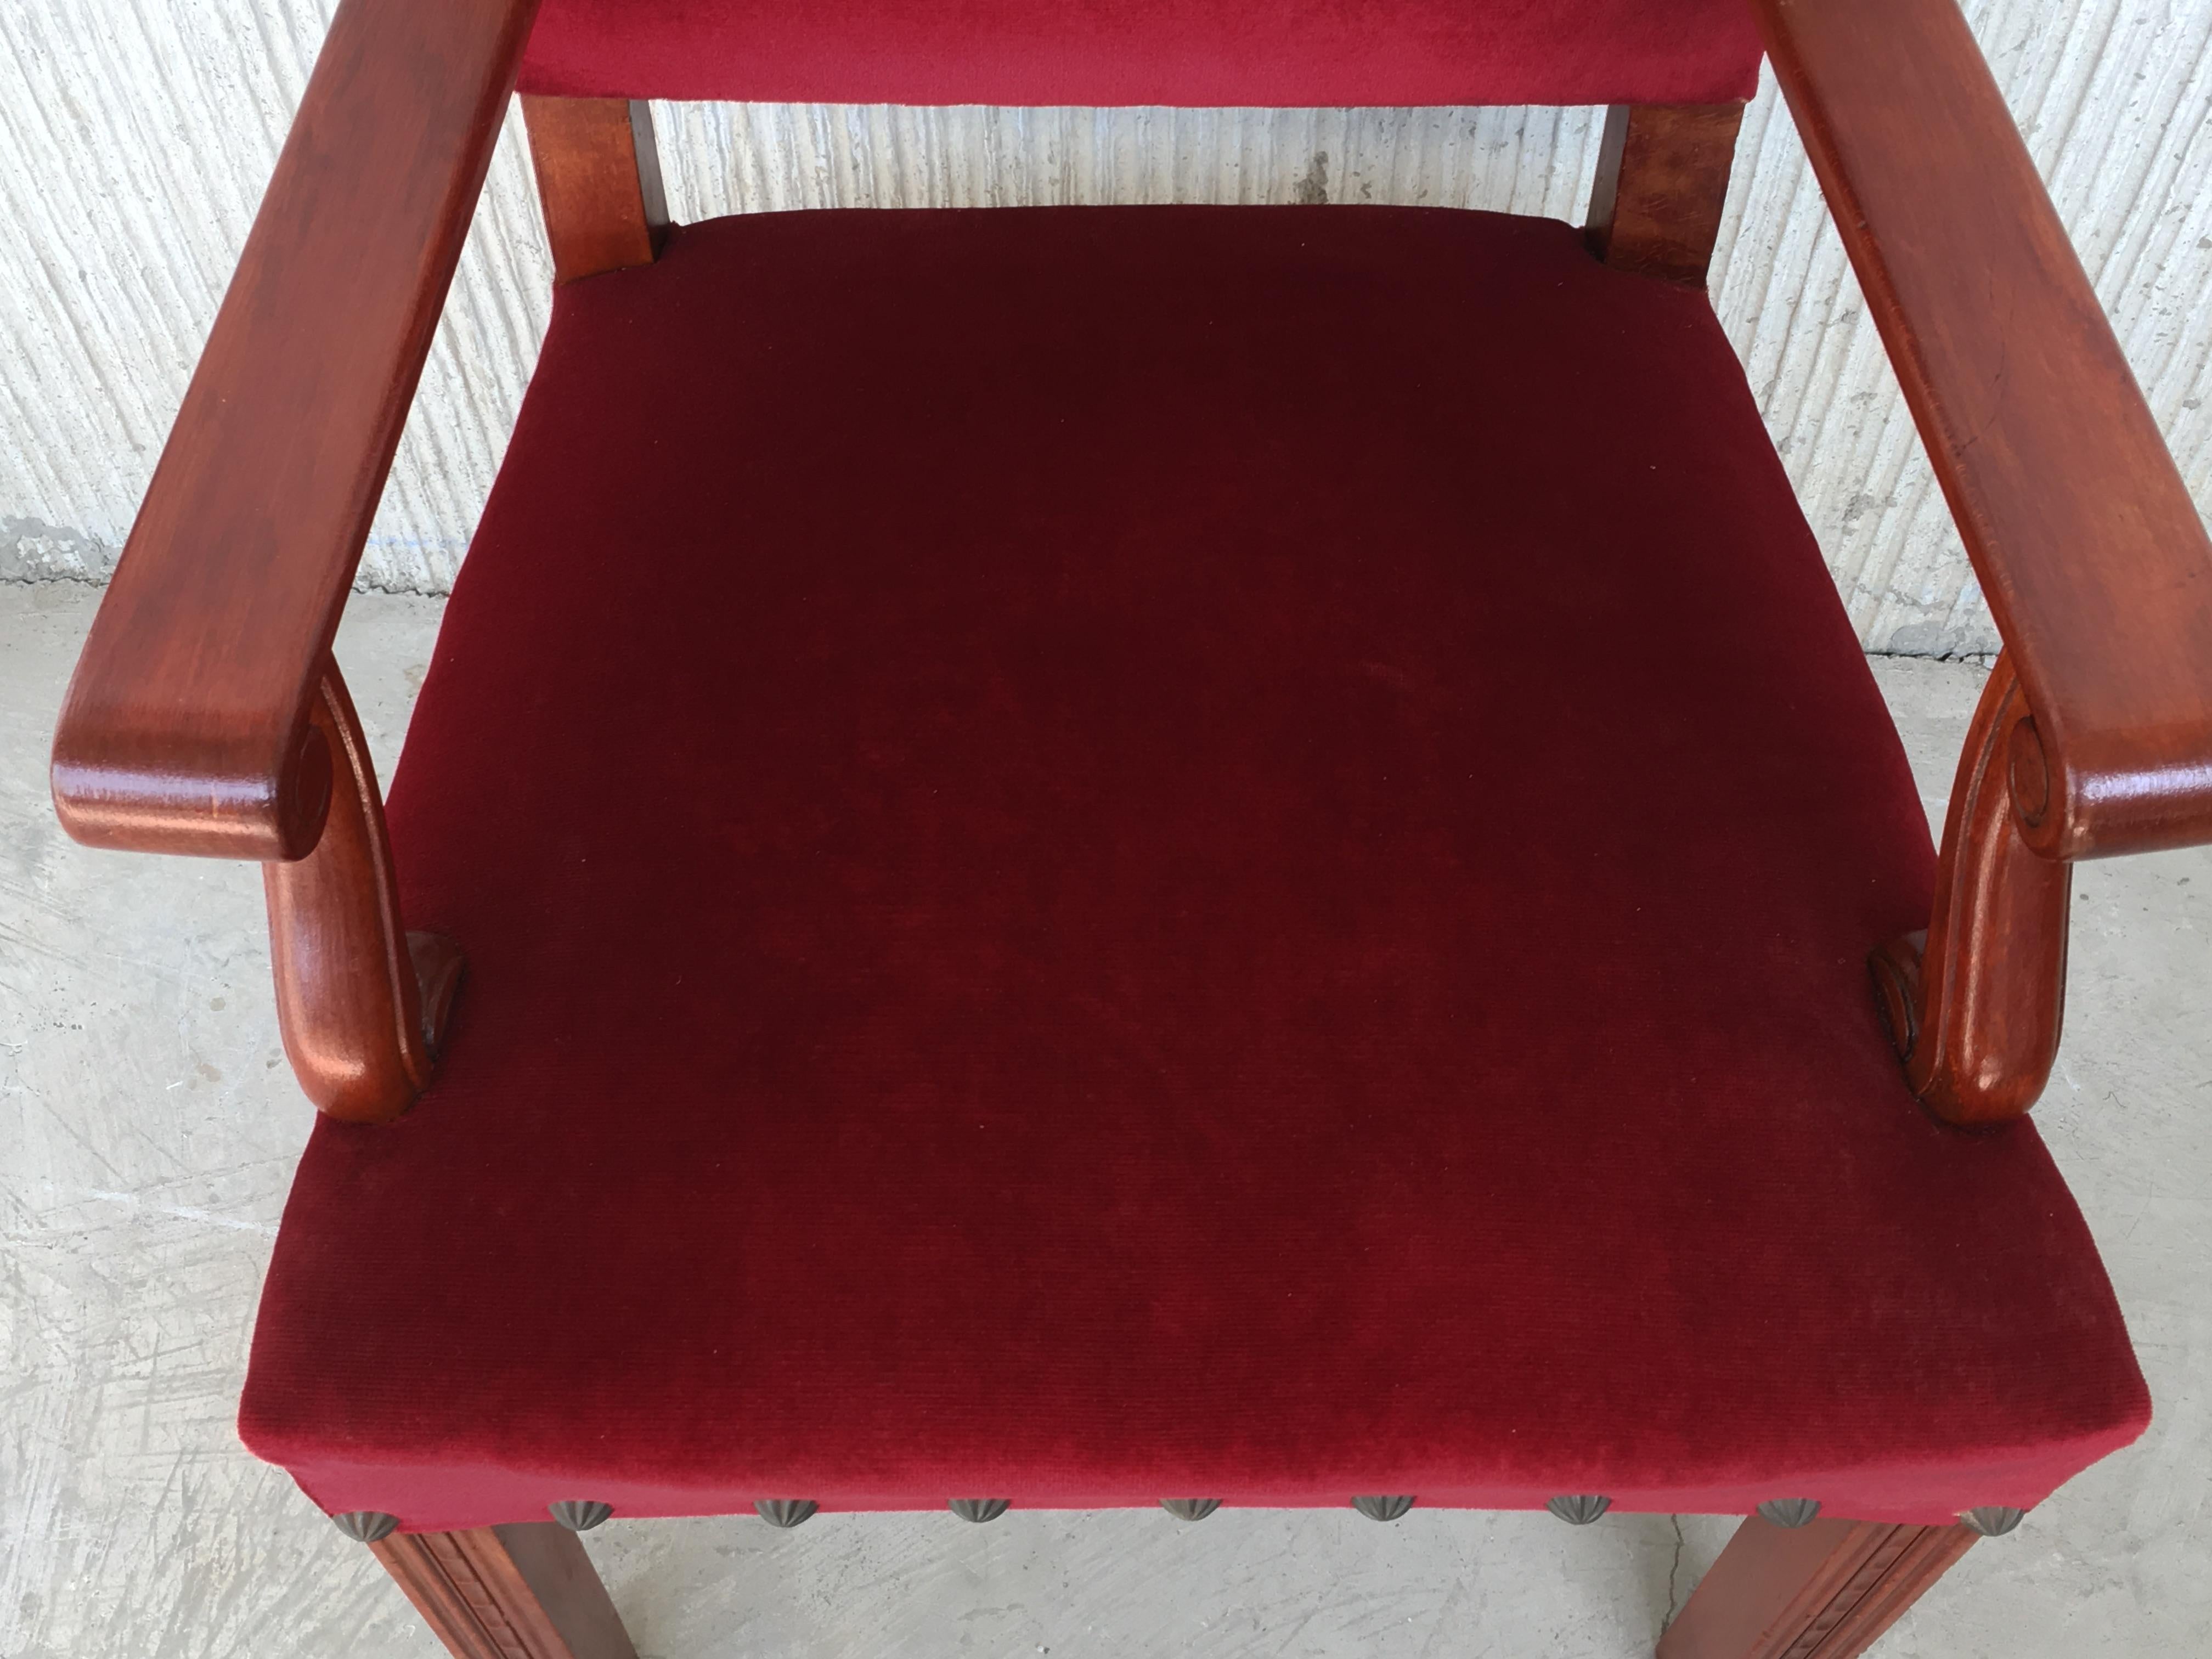 19th Century Spanish Revival High Back Armchair with Red Velvet Upholstery For Sale 4